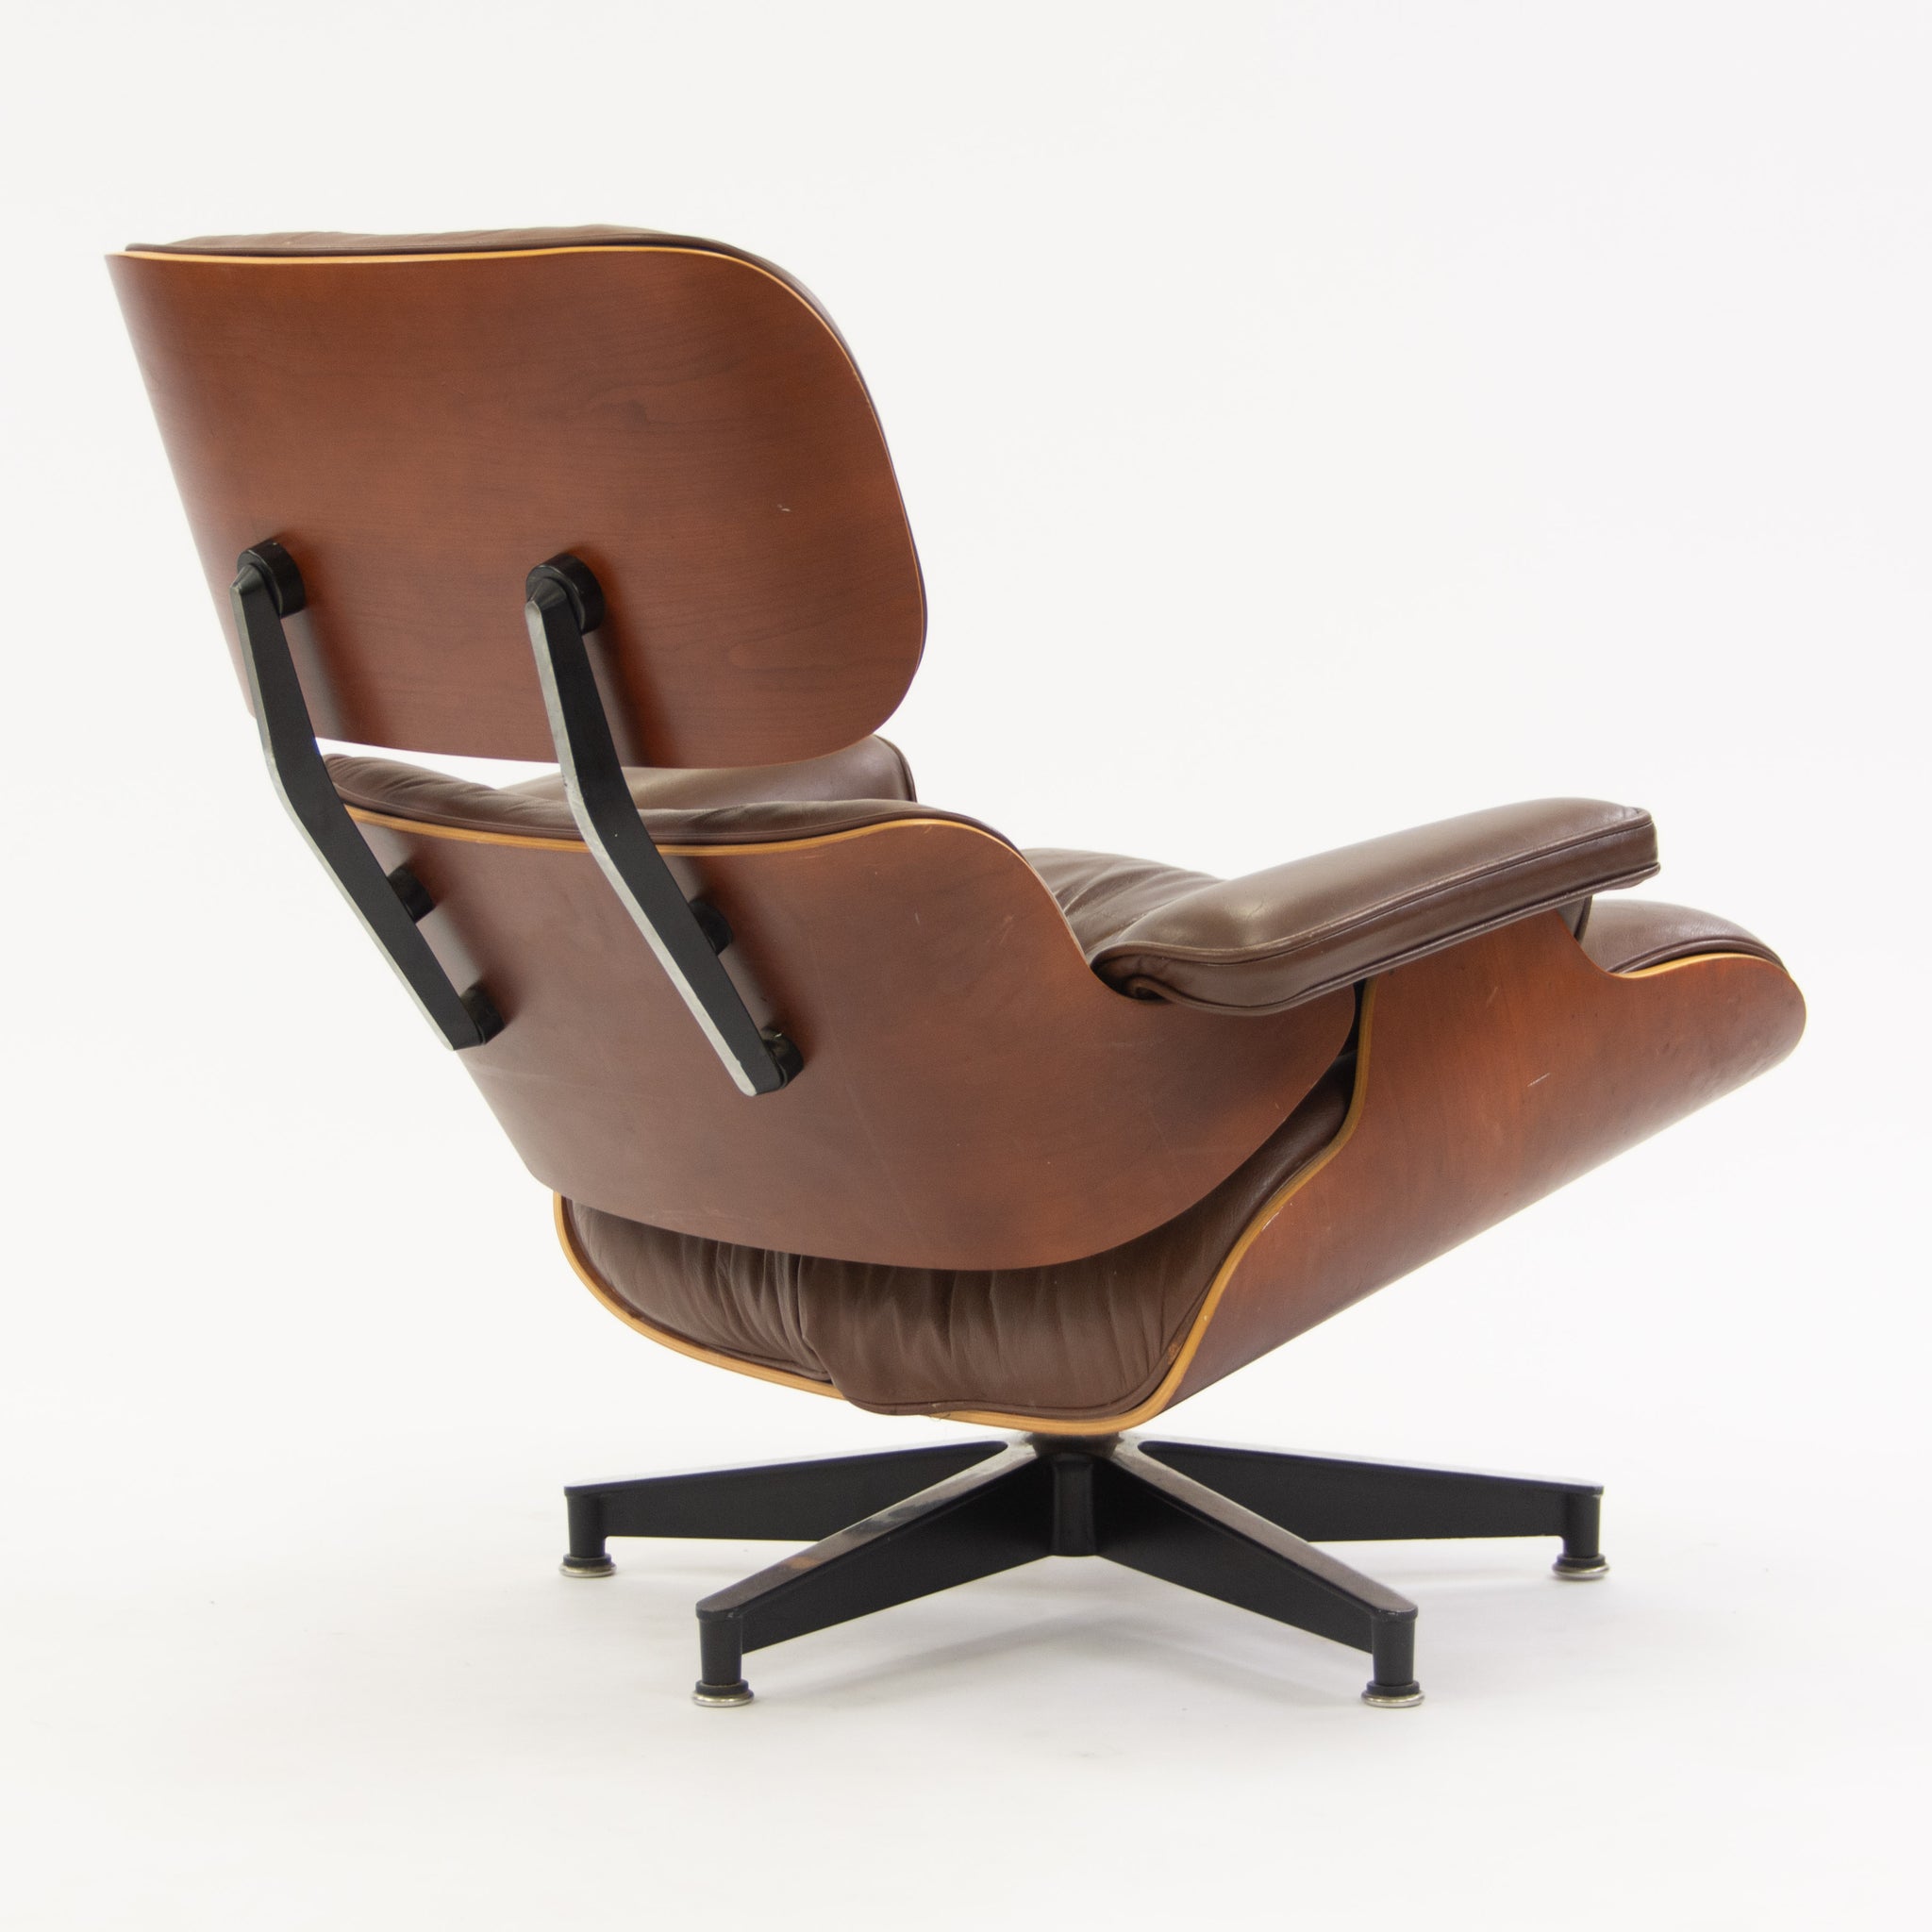 SOLD 1990's Herman Miller Eames Lounge Chair & Ottoman Cherry 670 671 Brown Leather